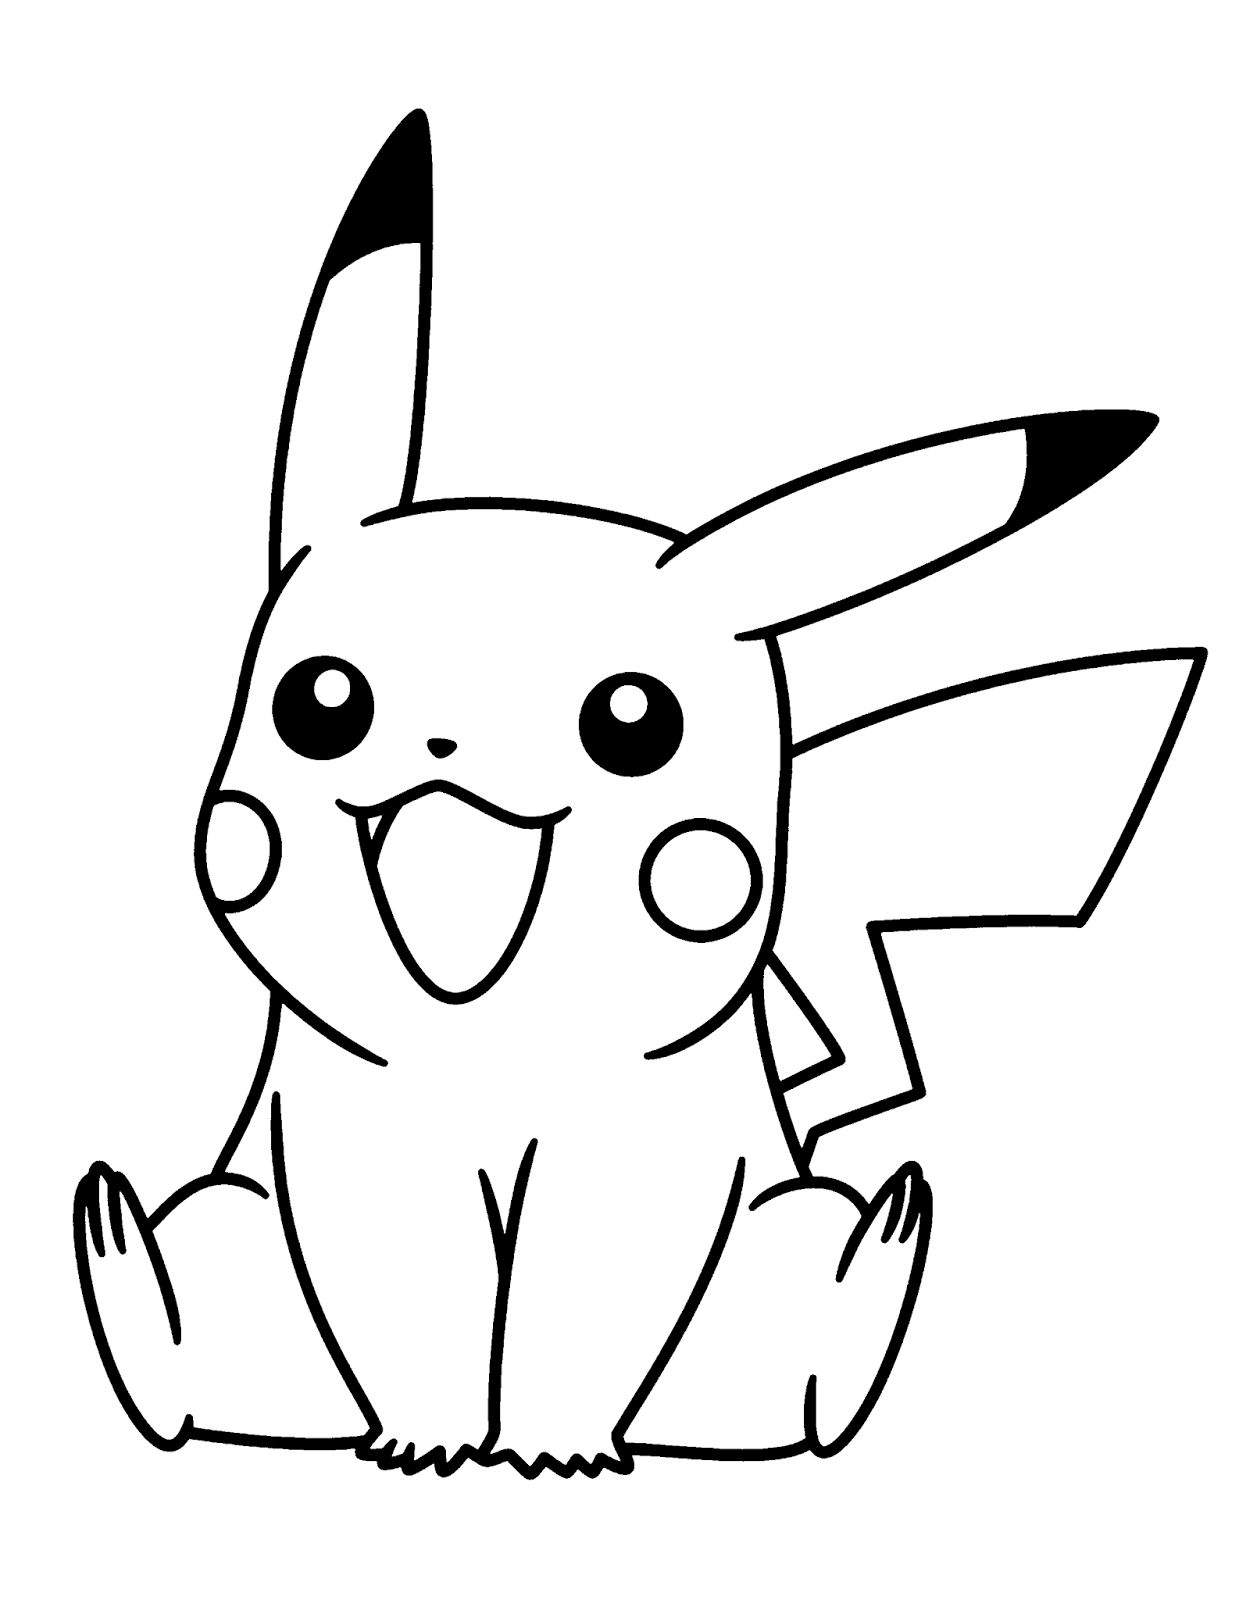 Pikachu PNG Black And White - 77034